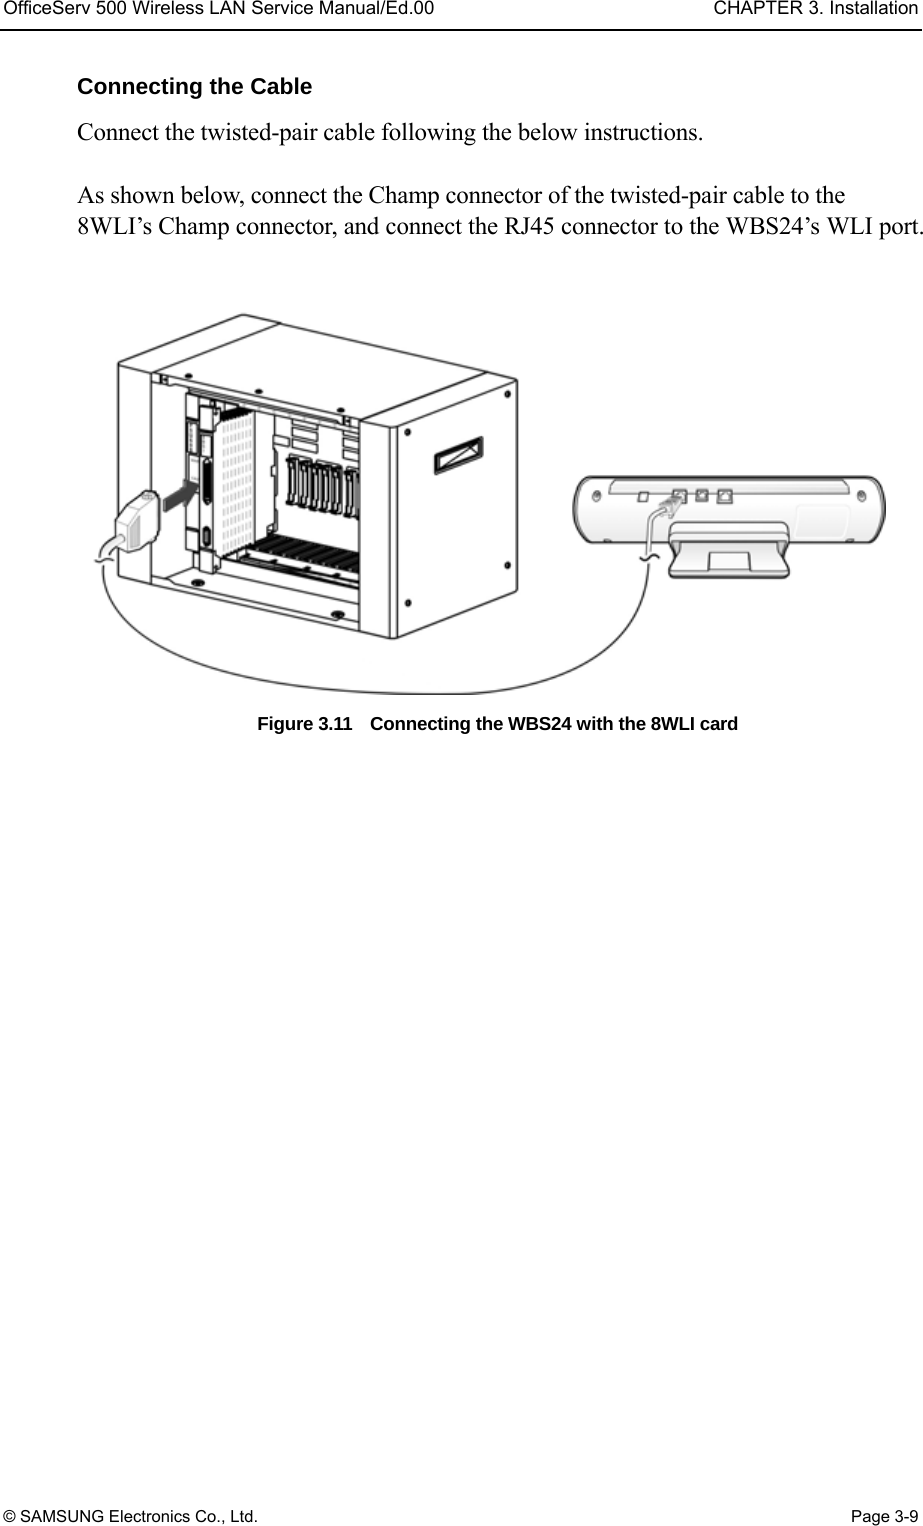 OfficeServ 500 Wireless LAN Service Manual/Ed.00  CHAPTER 3. Installation © SAMSUNG Electronics Co., Ltd.  Page 3-9 Connecting the Cable Connect the twisted-pair cable following the below instructions.  As shown below, connect the Champ connector of the twisted-pair cable to the 8WLI’s Champ connector, and connect the RJ45 connector to the WBS24’s WLI port.  Figure 3.11    Connecting the WBS24 with the 8WLI card     